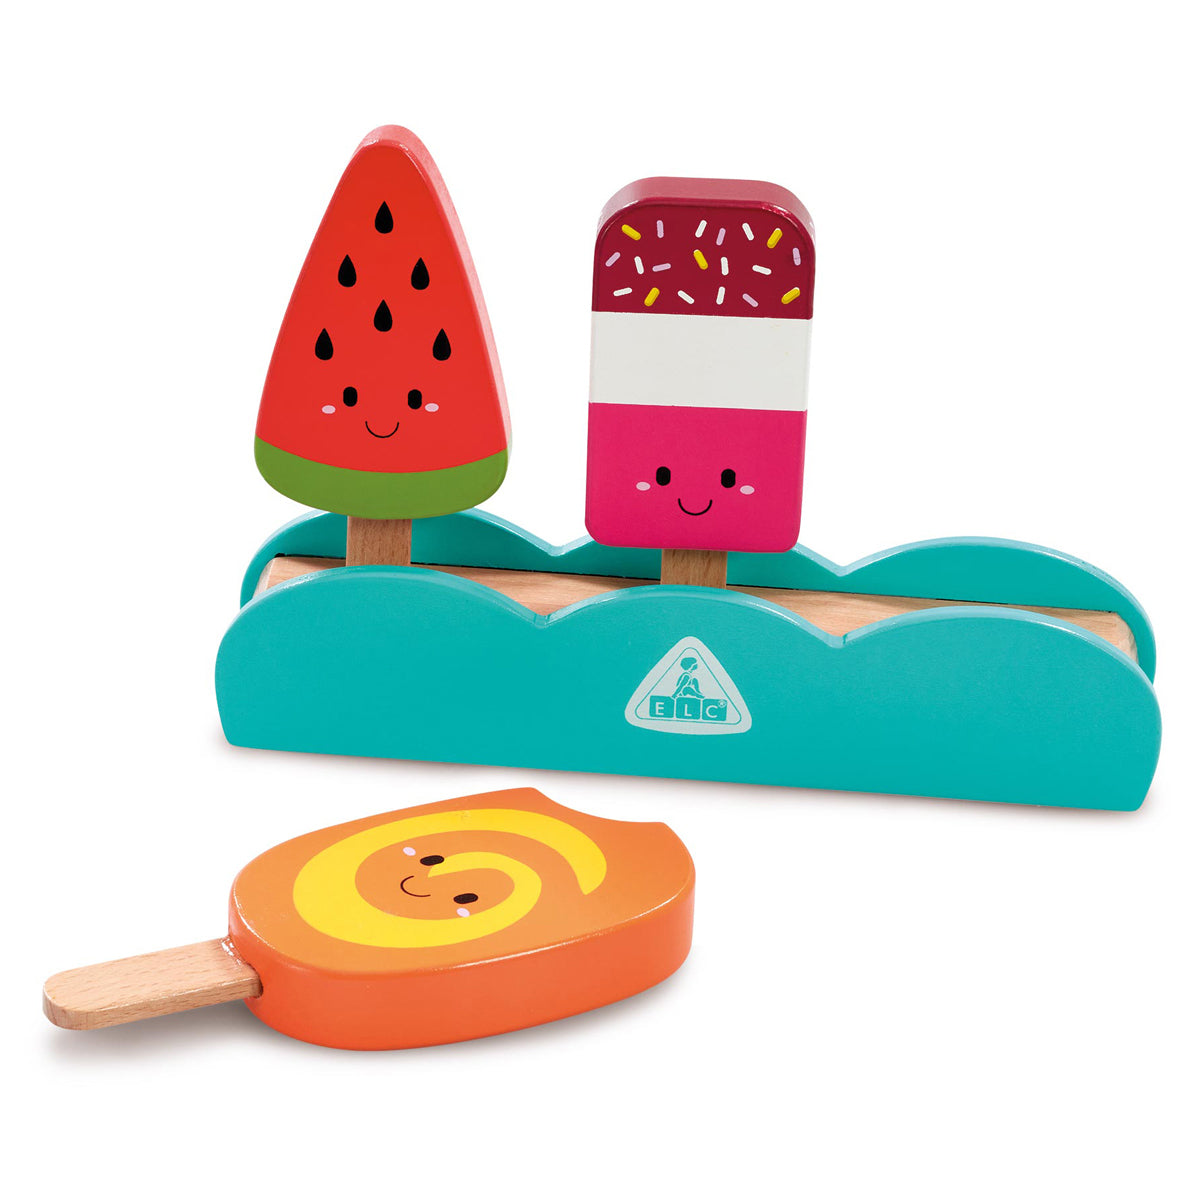 Wooden Lovely Lolly Playset